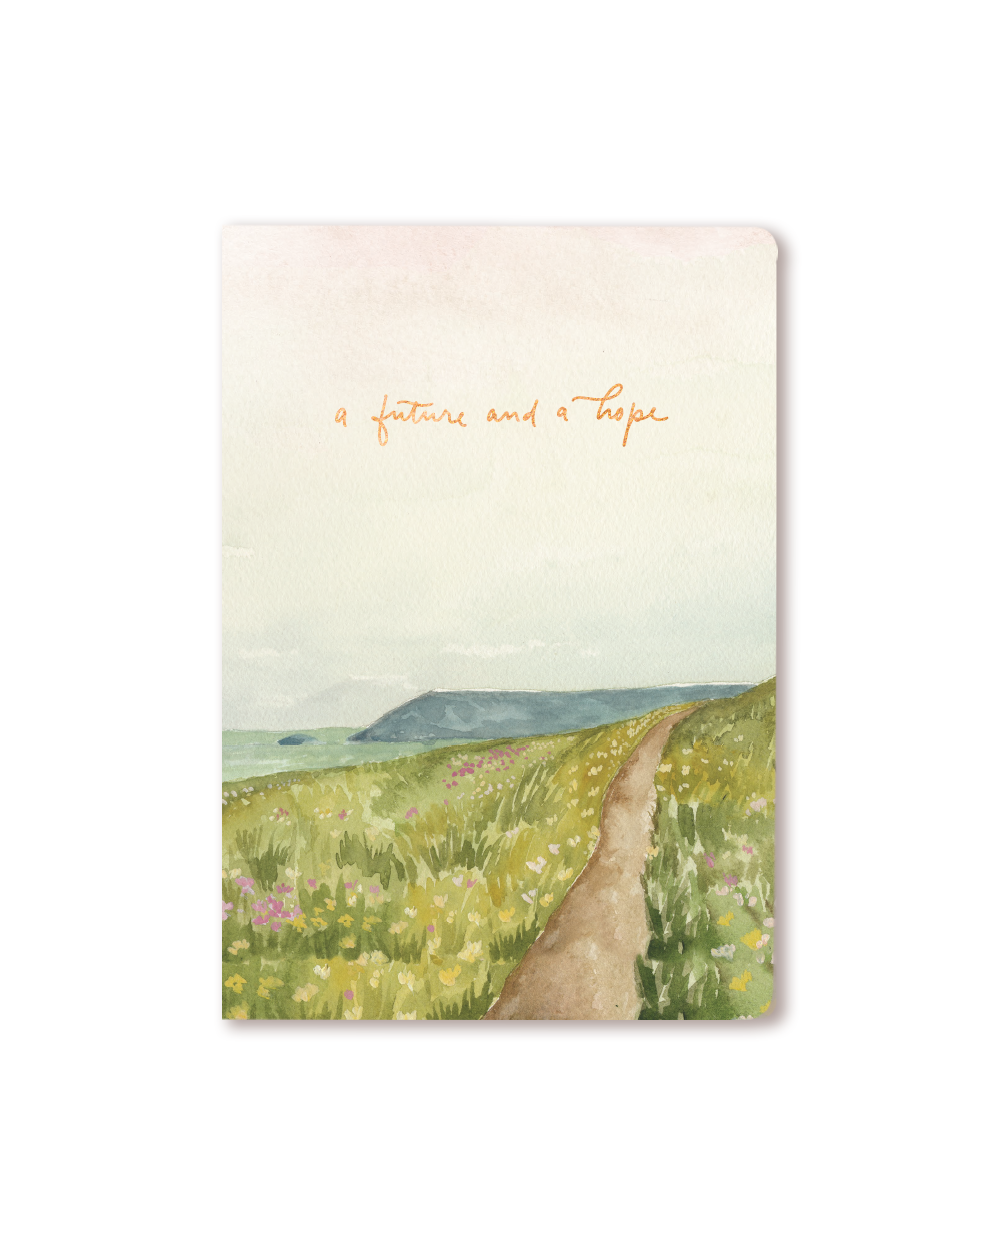 bible inspired lined writing journal notebook says A Future and a Hope - GraceLaced